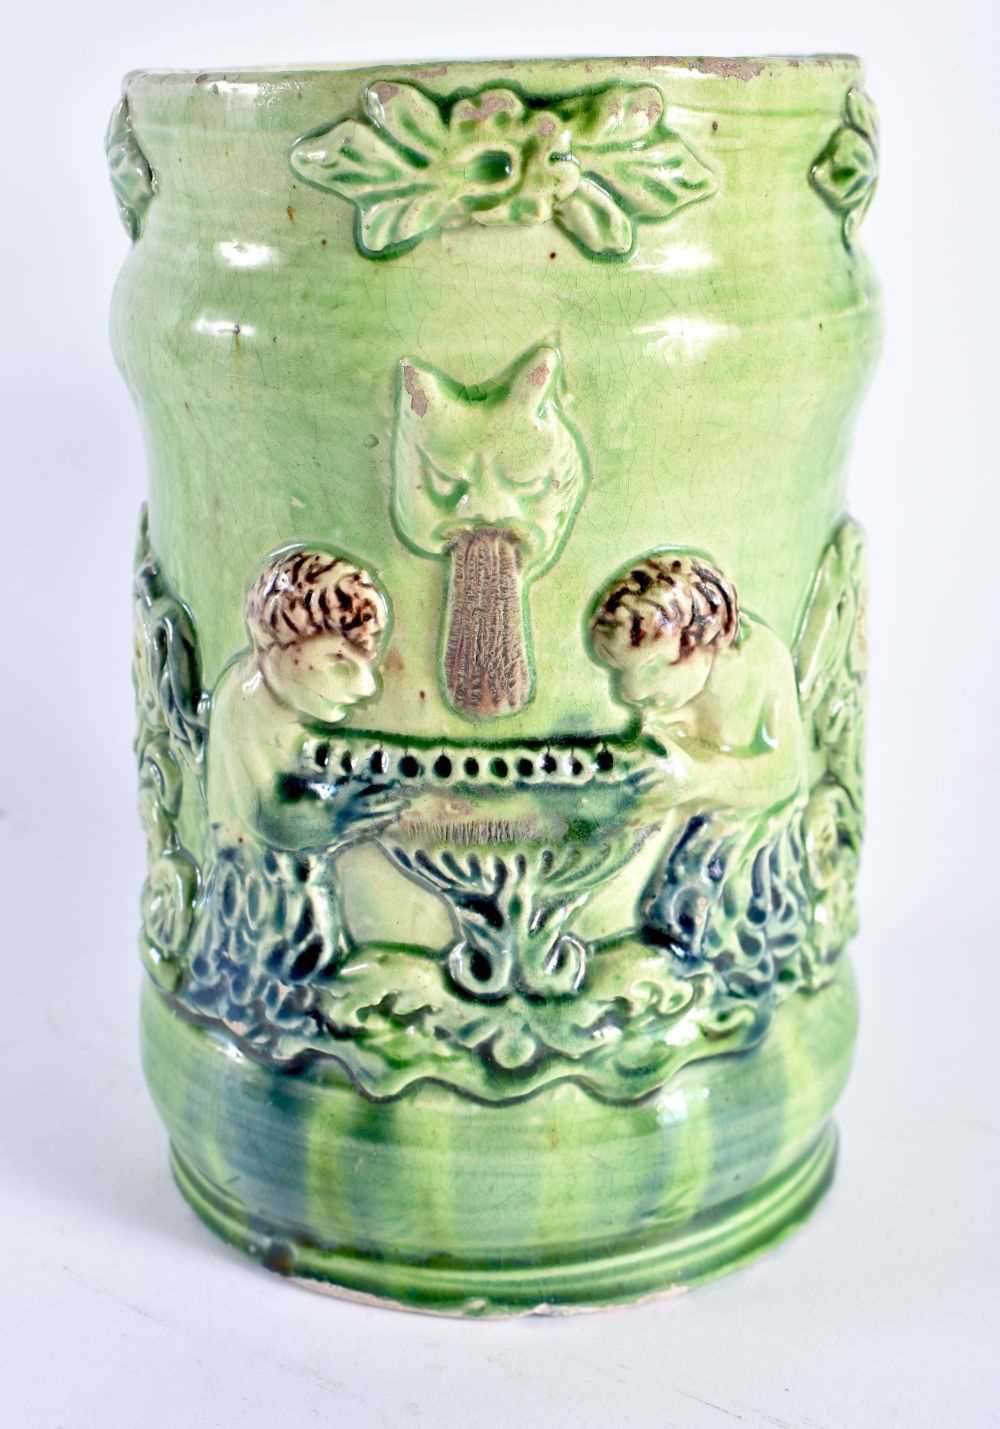 A RARE ANTIQUE GREEN GLAZED WHIELDON TYPE MAJOLICA MUG decorated in relief with figures. 14 cm x - Image 2 of 6